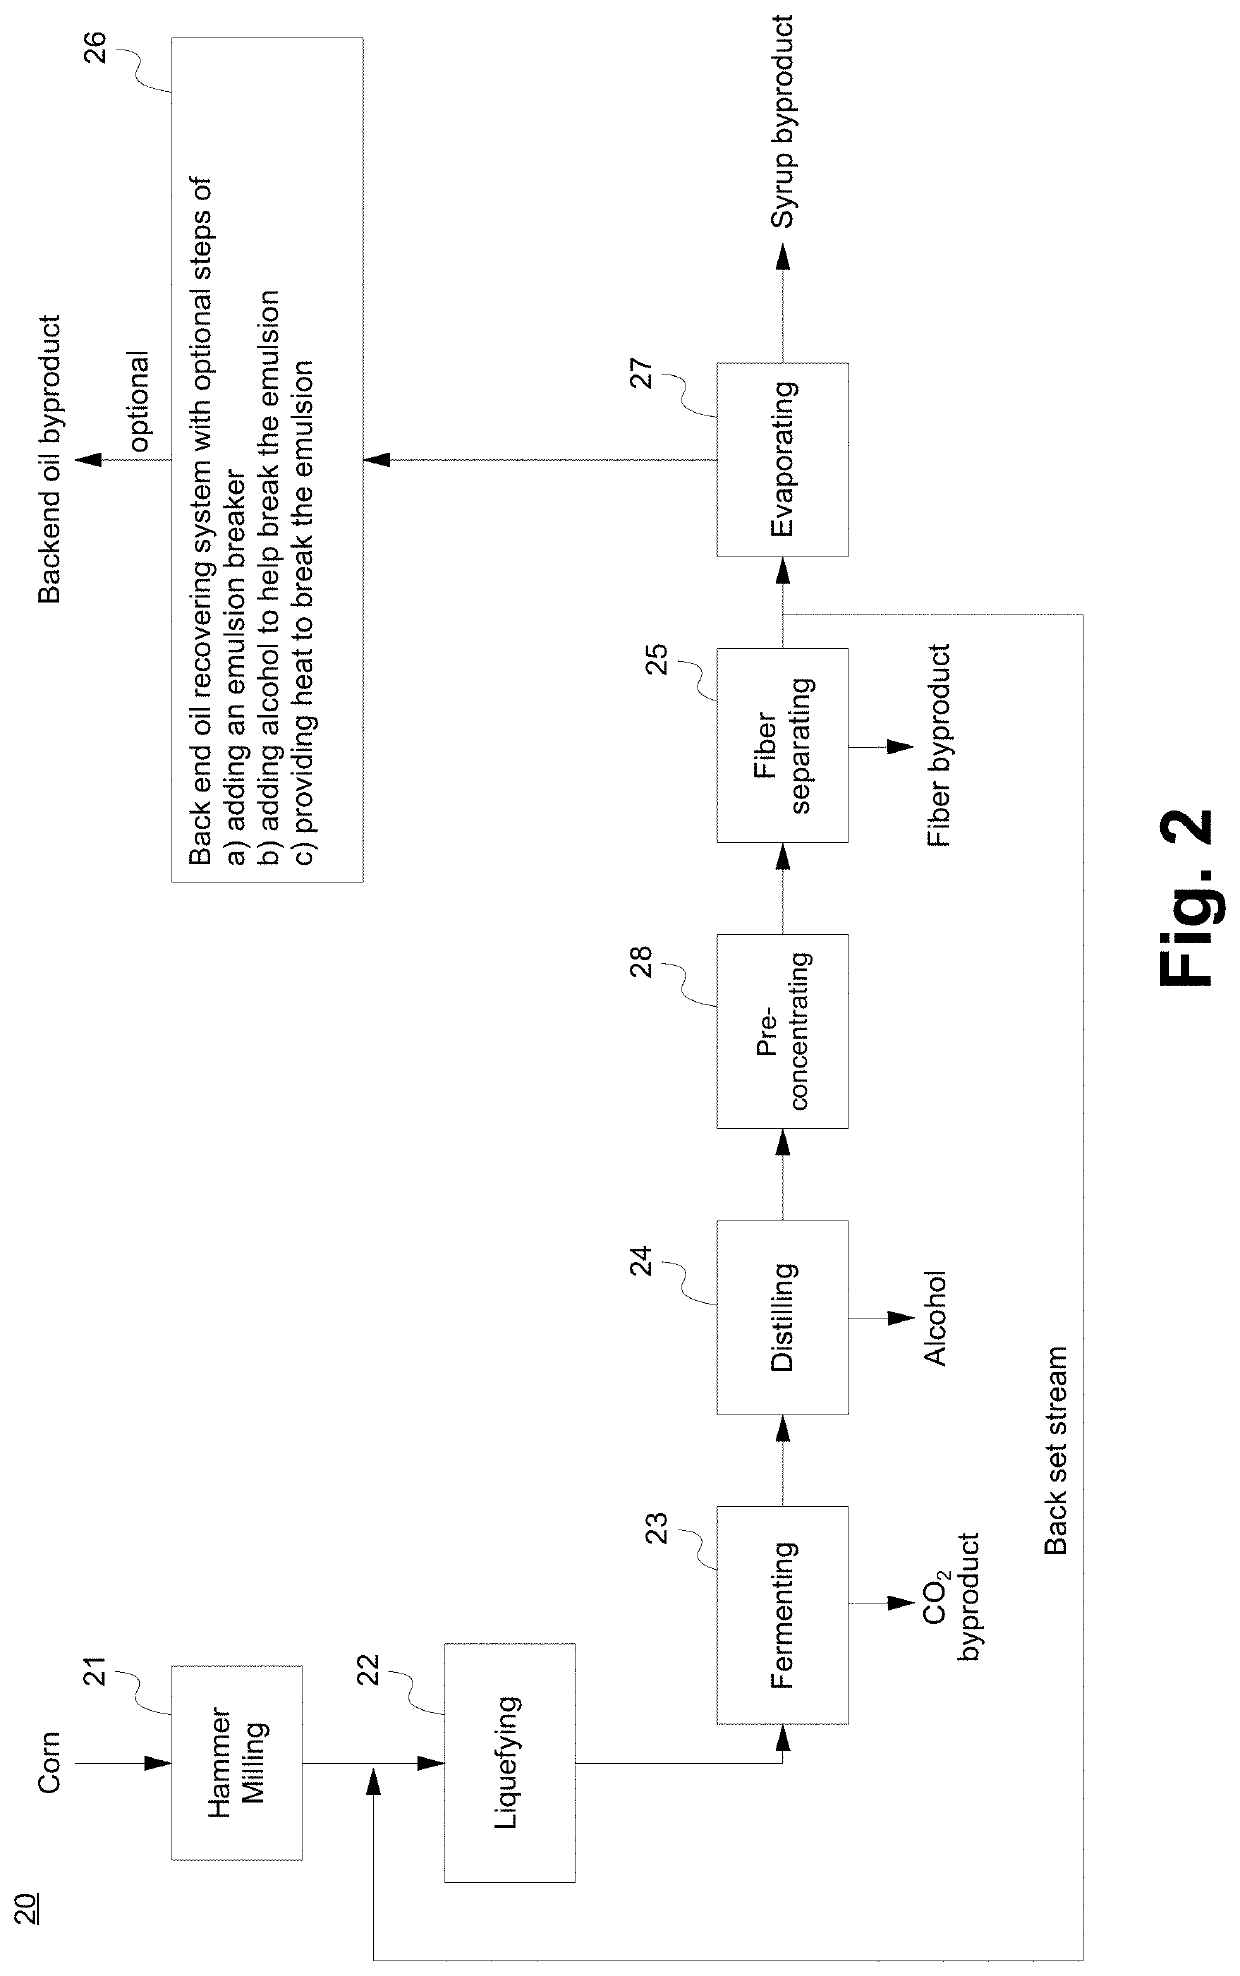 System for and method of making four types of animal feeds from grains that are used in the alcohol production plant